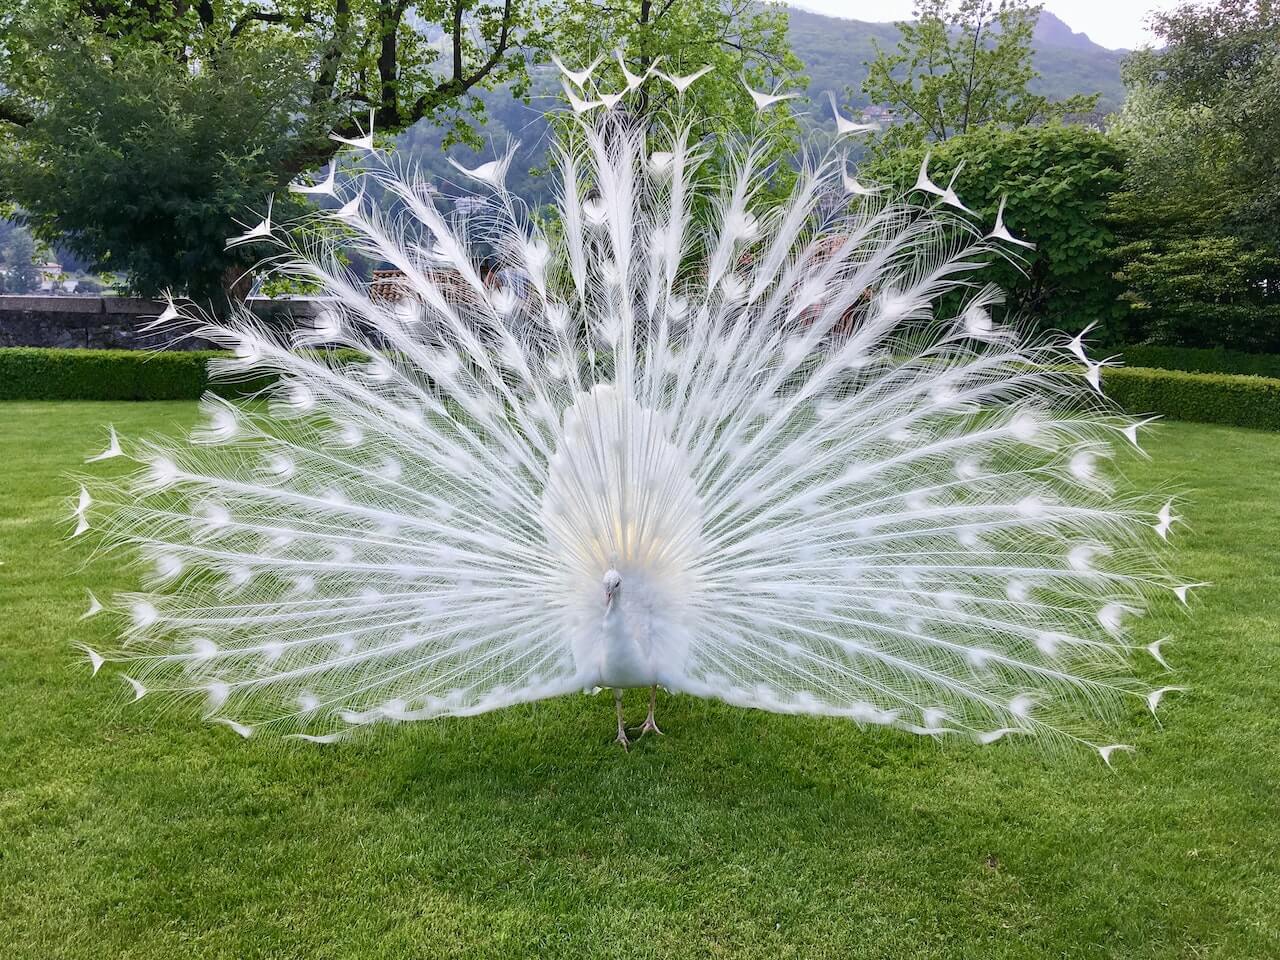 Graceful Animals: The White Peacock 